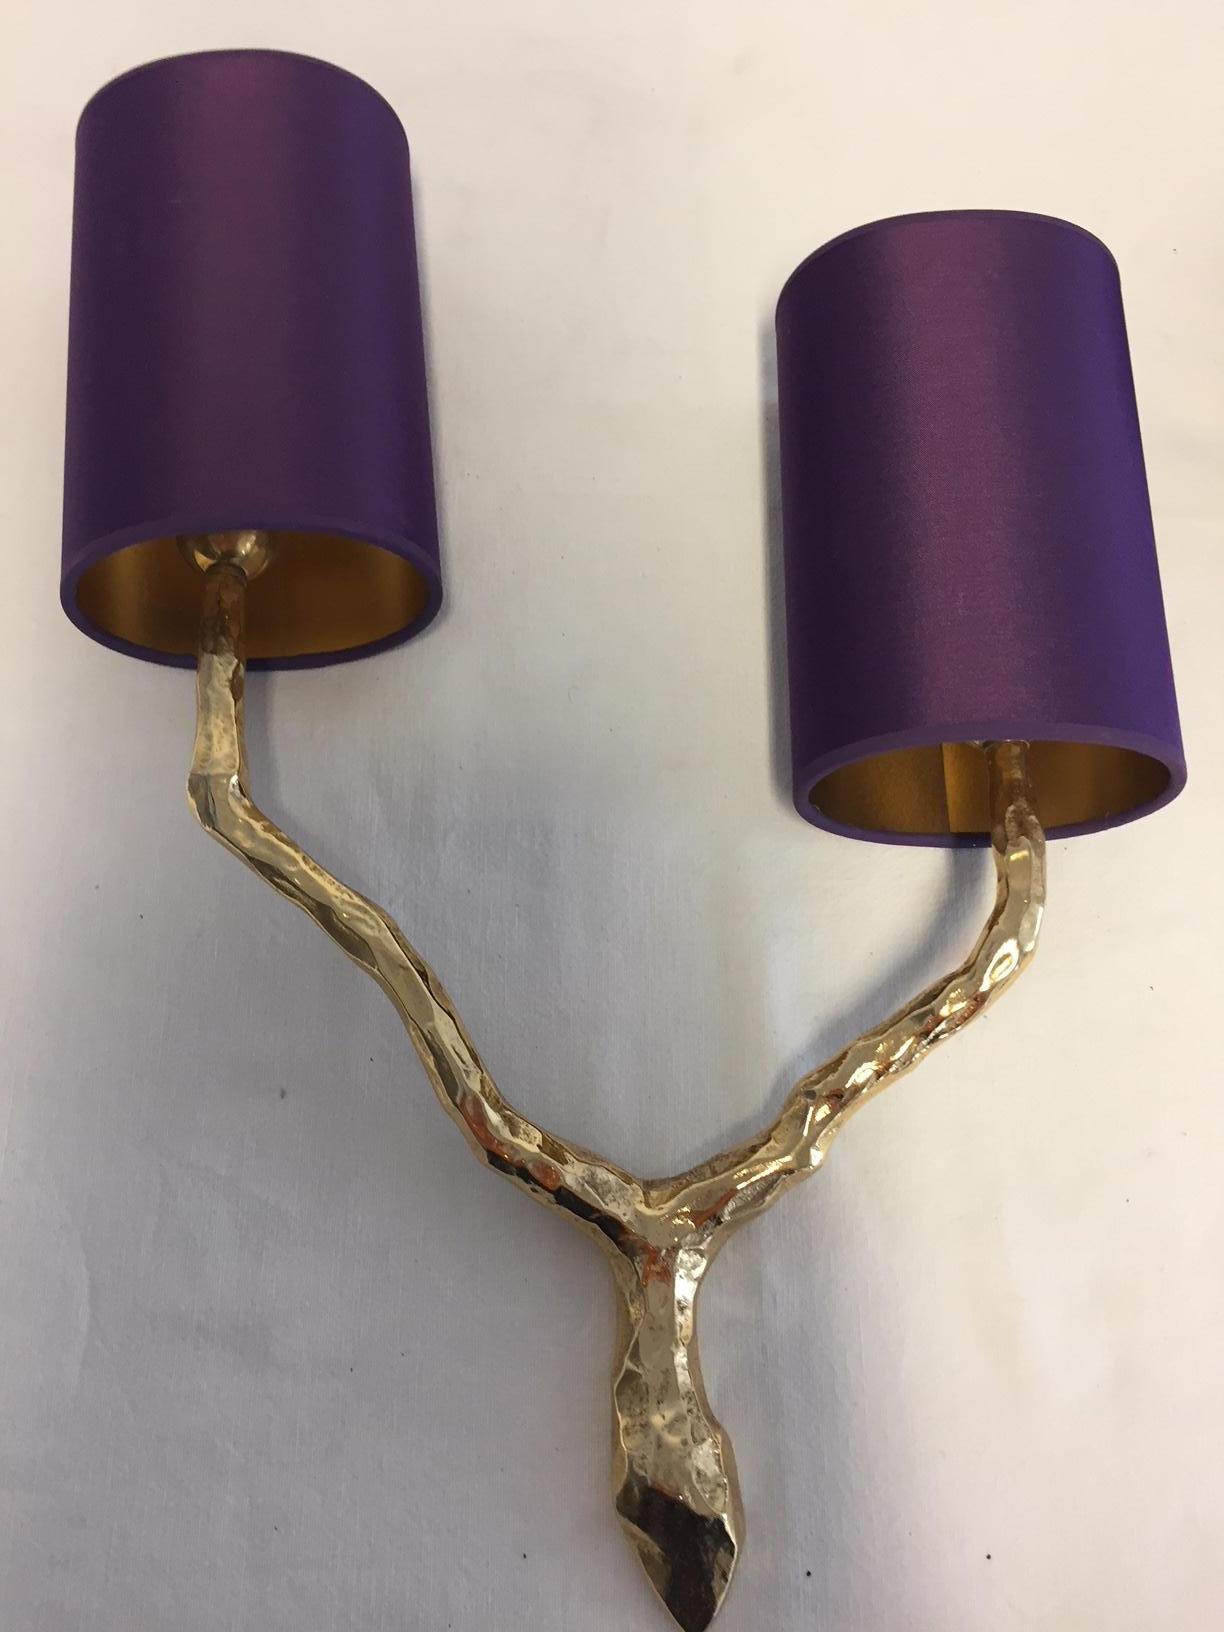 Pair of French art decorative bronze sconces by Maison Arlus from 1960.
Very good condition, wired in European standard, lamp shades in col. purple silk inside with glossy gold lining 
Price per SET

Measures: Height 51cm, width 25cm, depth 14cm.